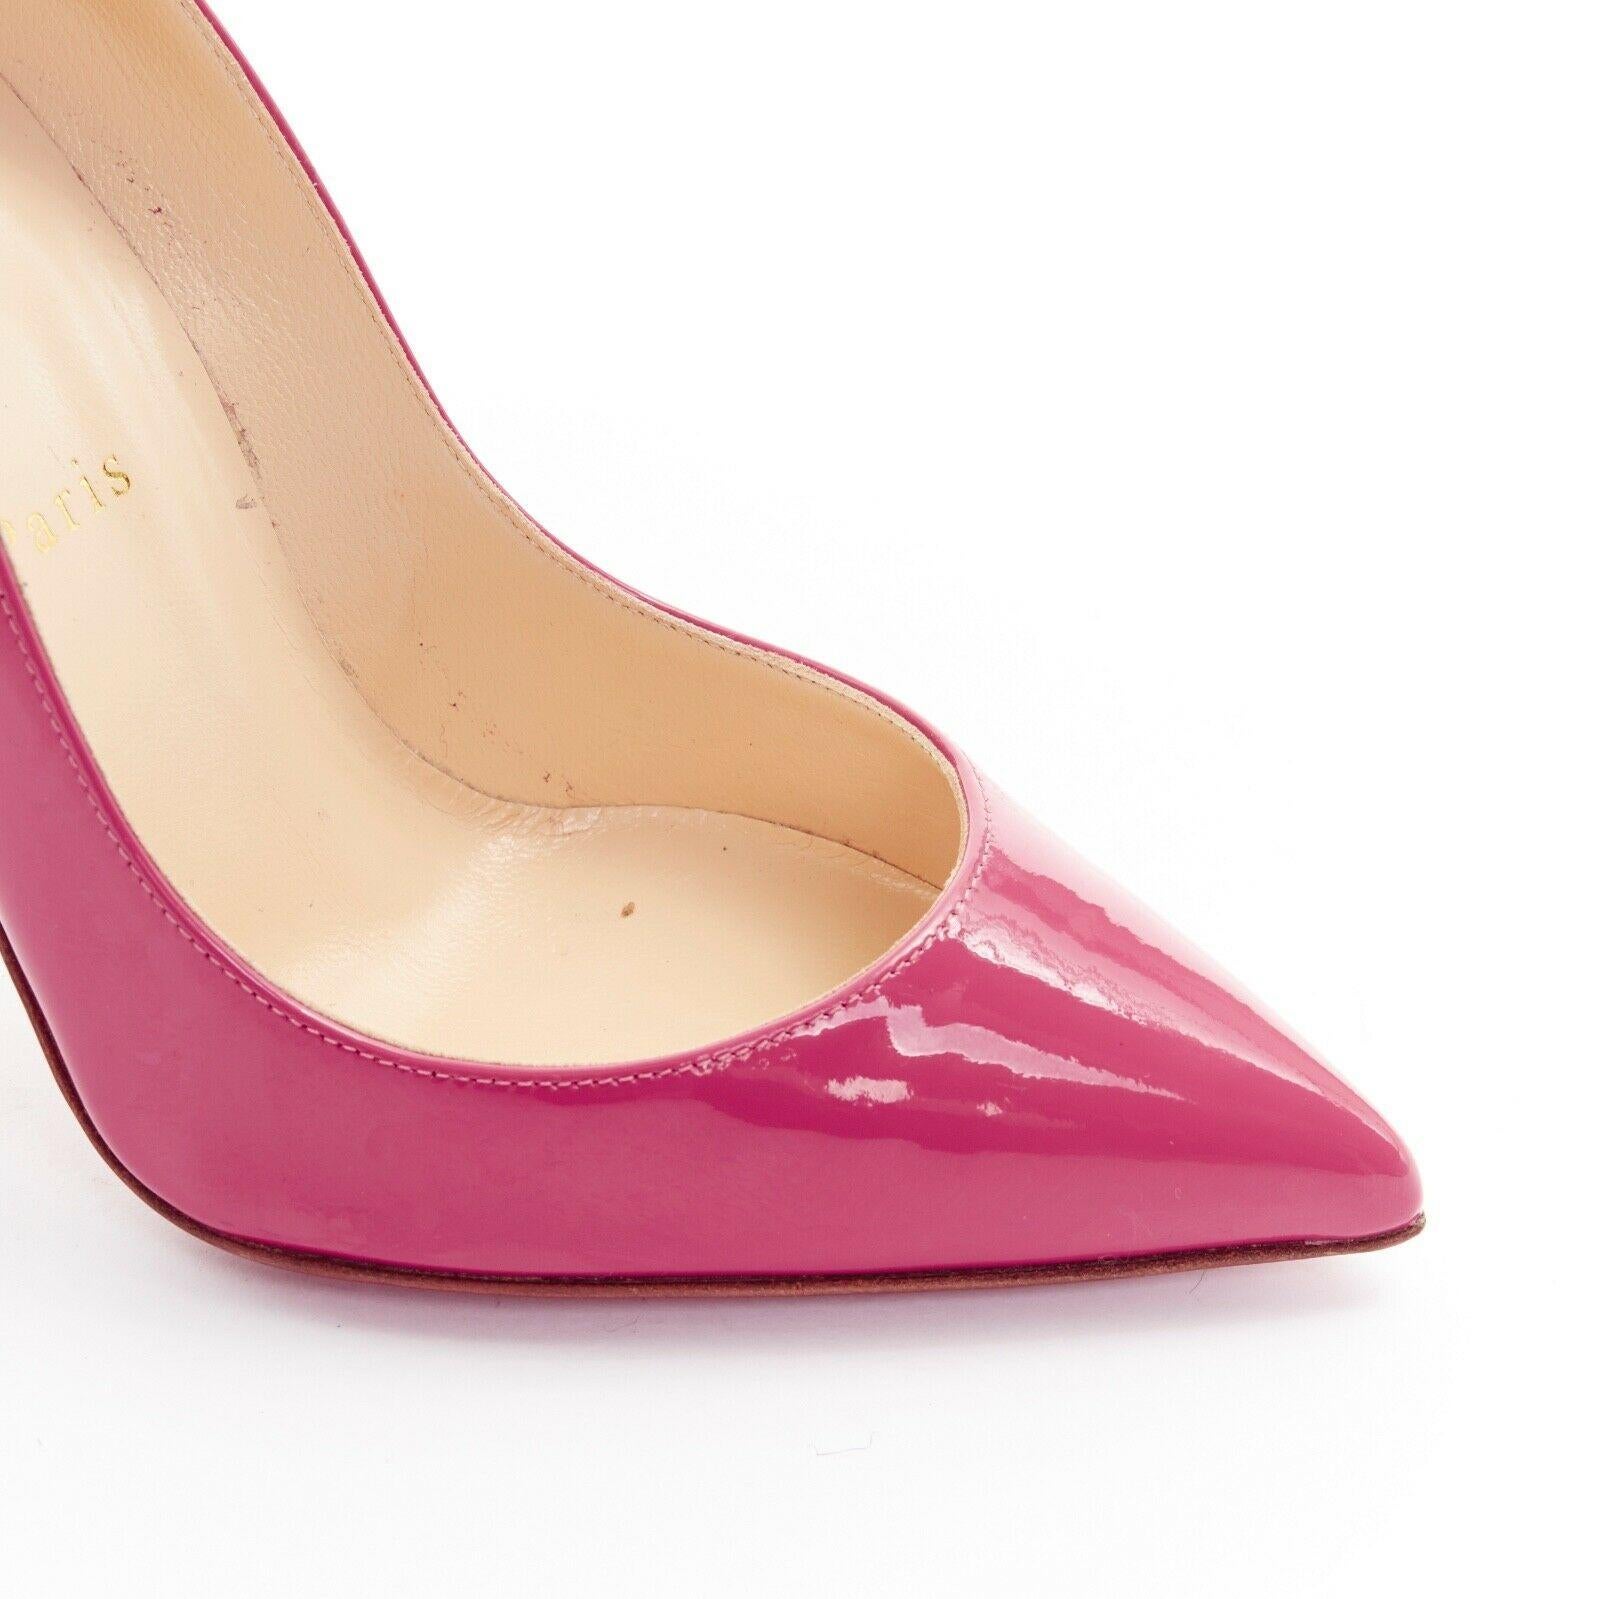 new CHRISTIAN LOUBOUTIN Pigalle Follies 100 pink patent pointed toe pumps EU37 3